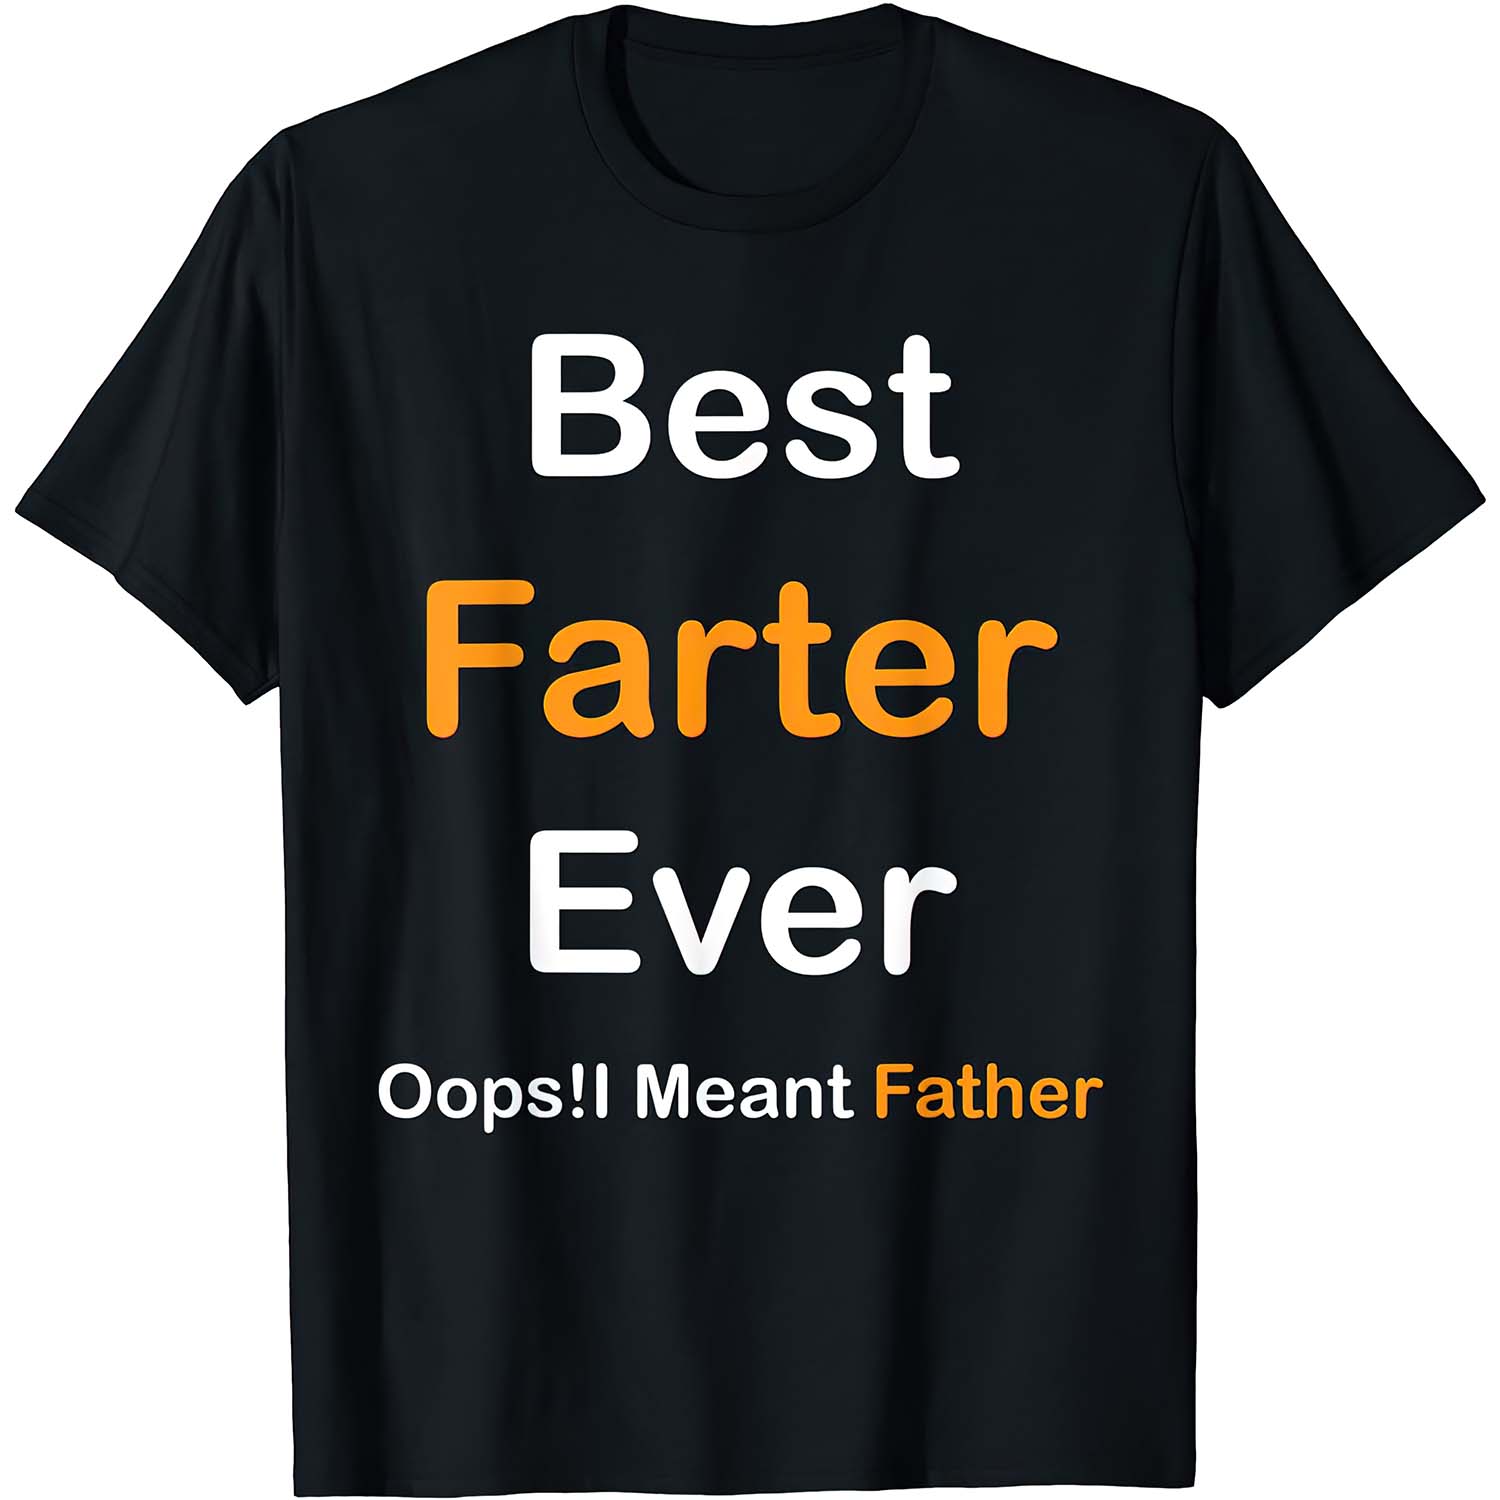 Best Farter Ever Oops Meant Father Shirt